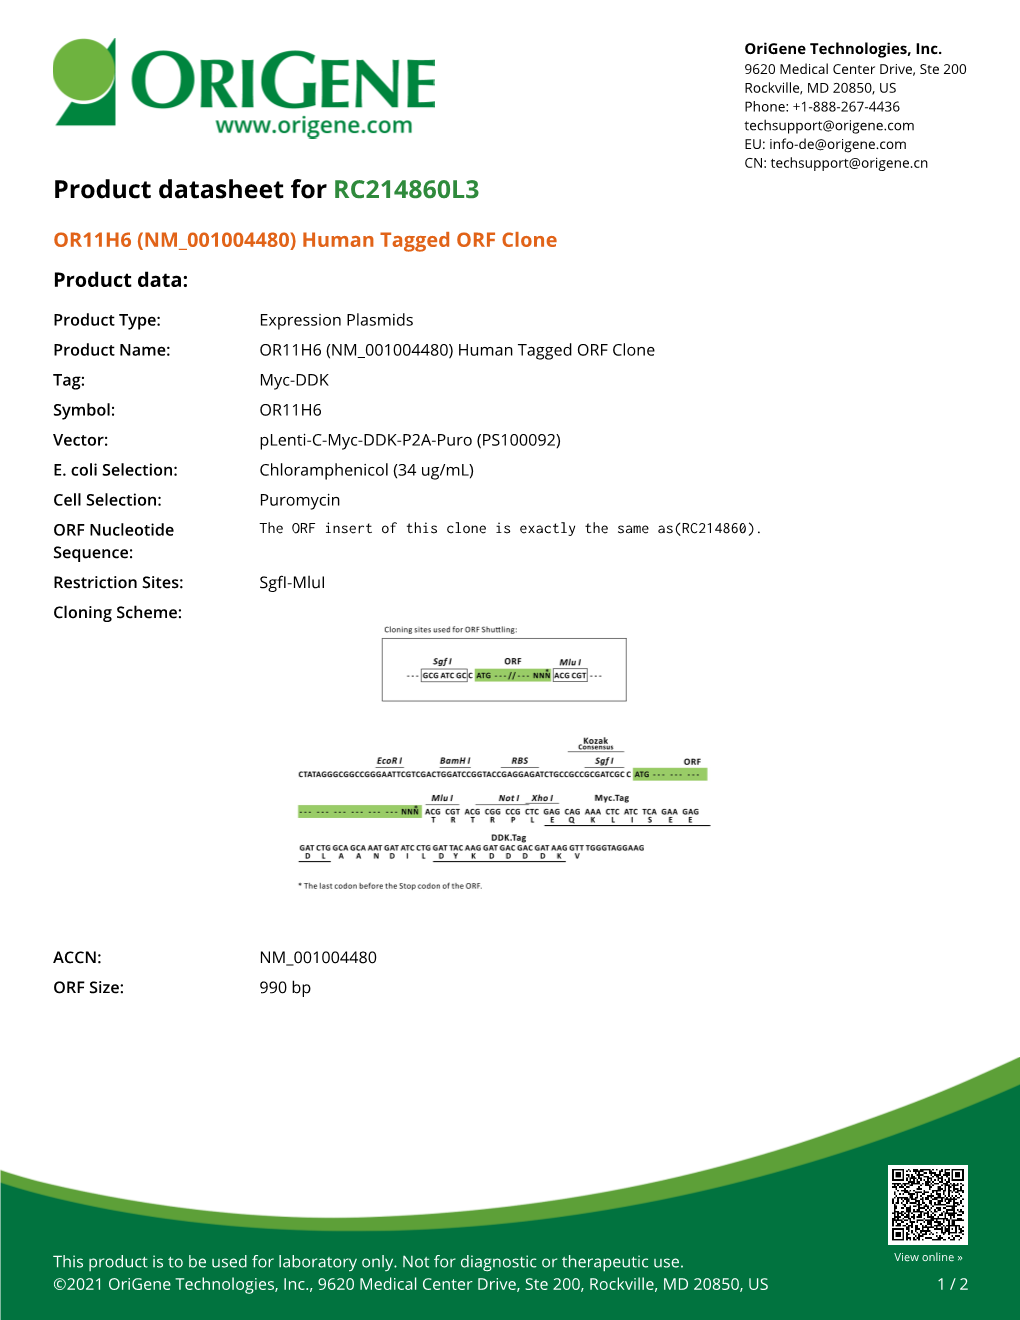 OR11H6 (NM 001004480) Human Tagged ORF Clone Product Data